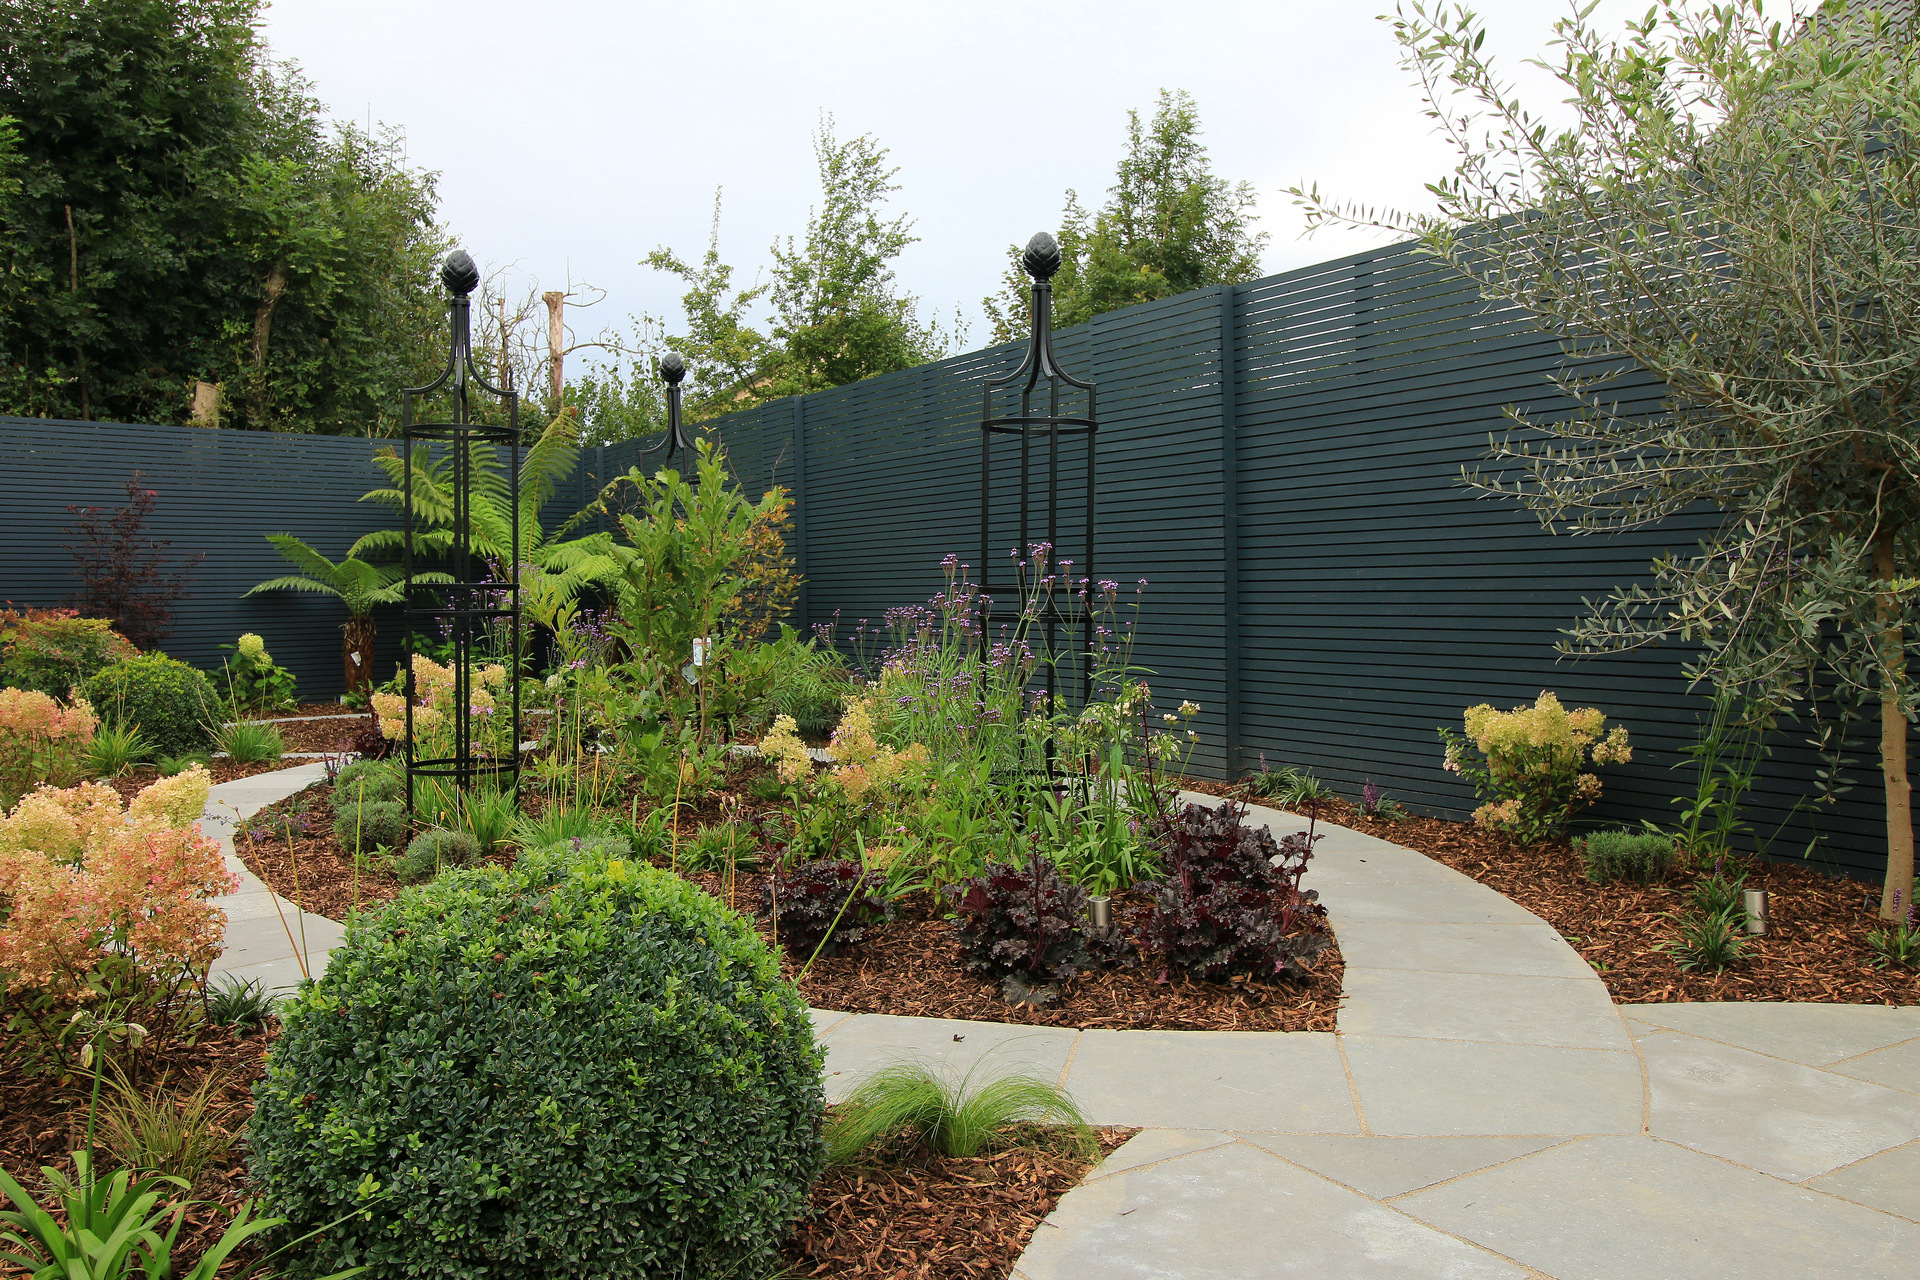 Family Garden Garden Design & Landscaping project in Rathcoole, Dublin 24 providing a host of visual features including specimen trees & shrubs, Rose Obelisks by Classic Garden Elements, custom made horizontal timber slatted fencing, Limestone patios & paving | Design & Landscaping by Owen Chubb Garden Landscapers